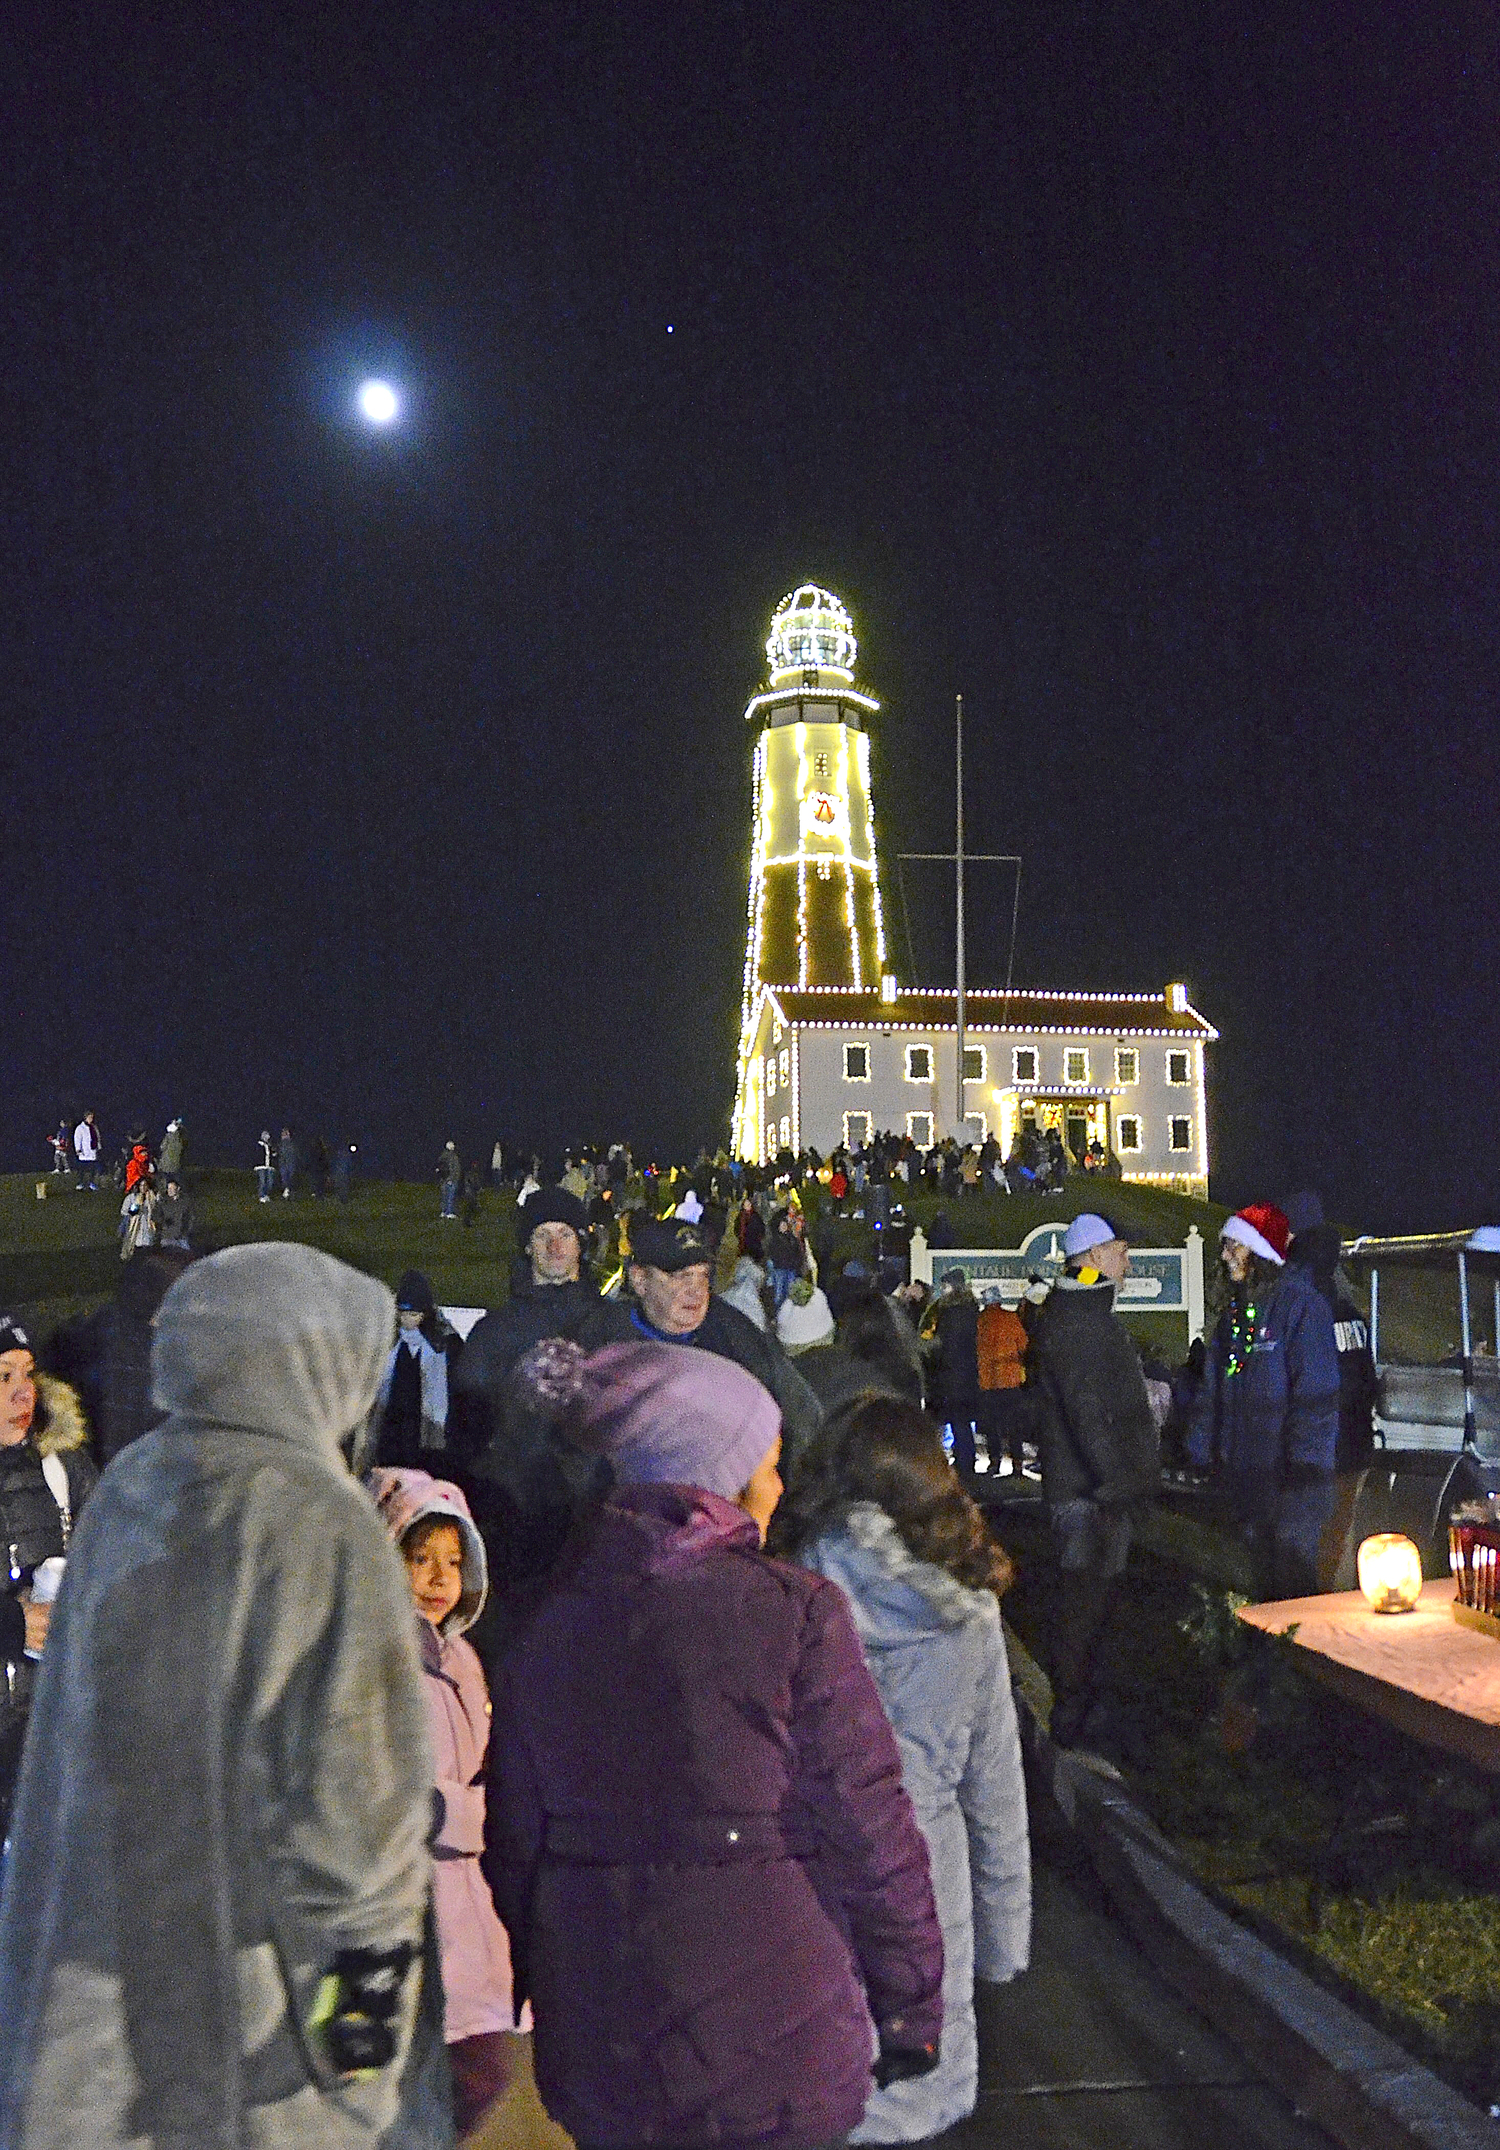 The Montauk Point Lighthouse lighted for the season on Saturday evening.